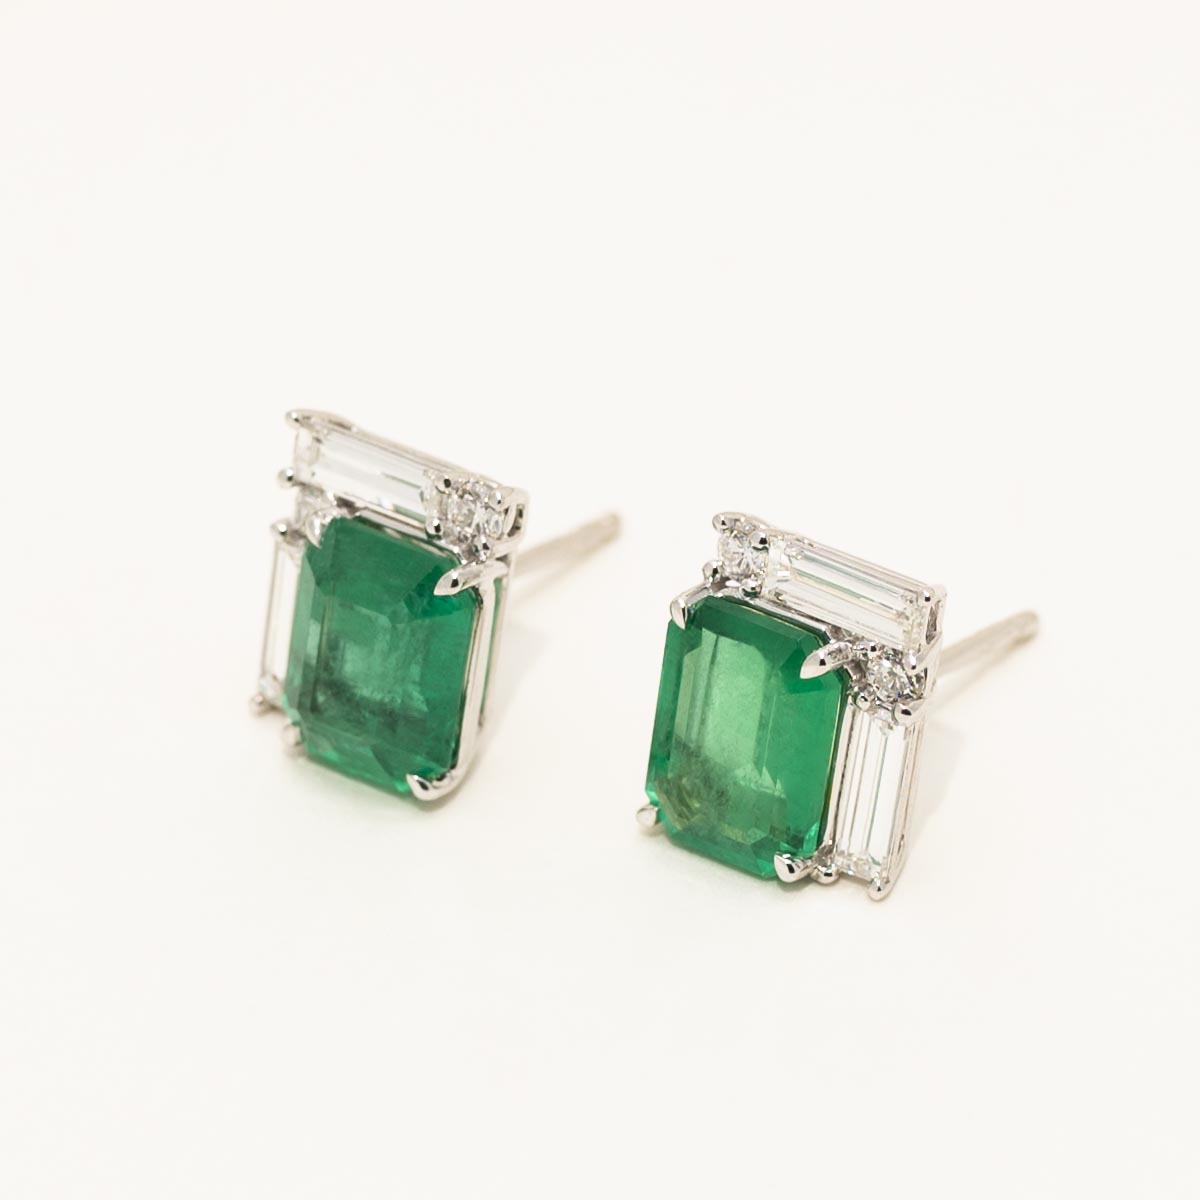 Emerald Art Deco Stud Earrings in 18kt White Gold with Diamonds (7/8ct tw)